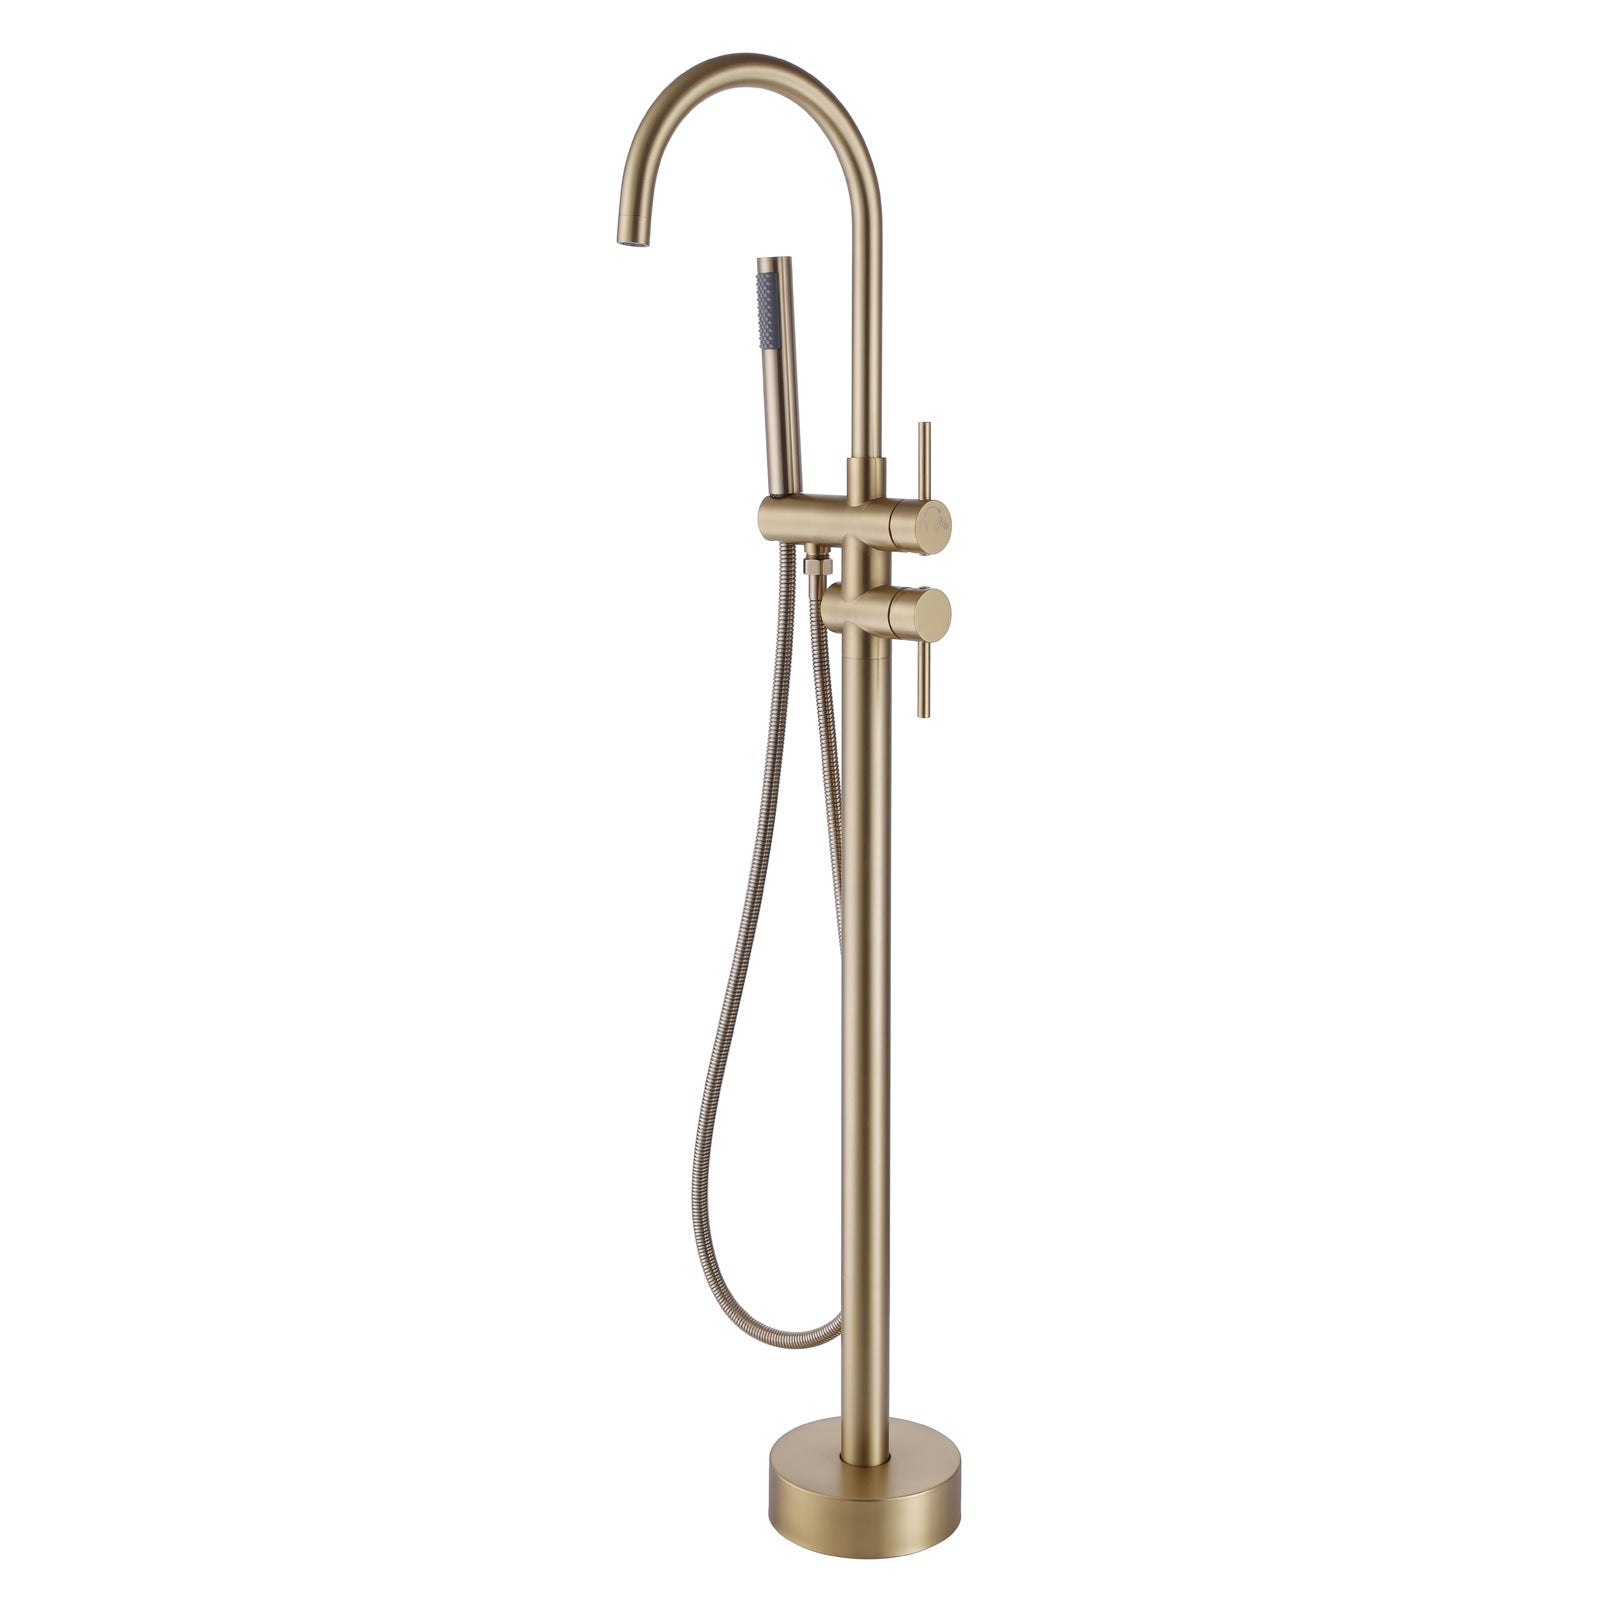 Brass Floor Mount Tub Bathtub Faucet Single Handle with Hand Shower - Round